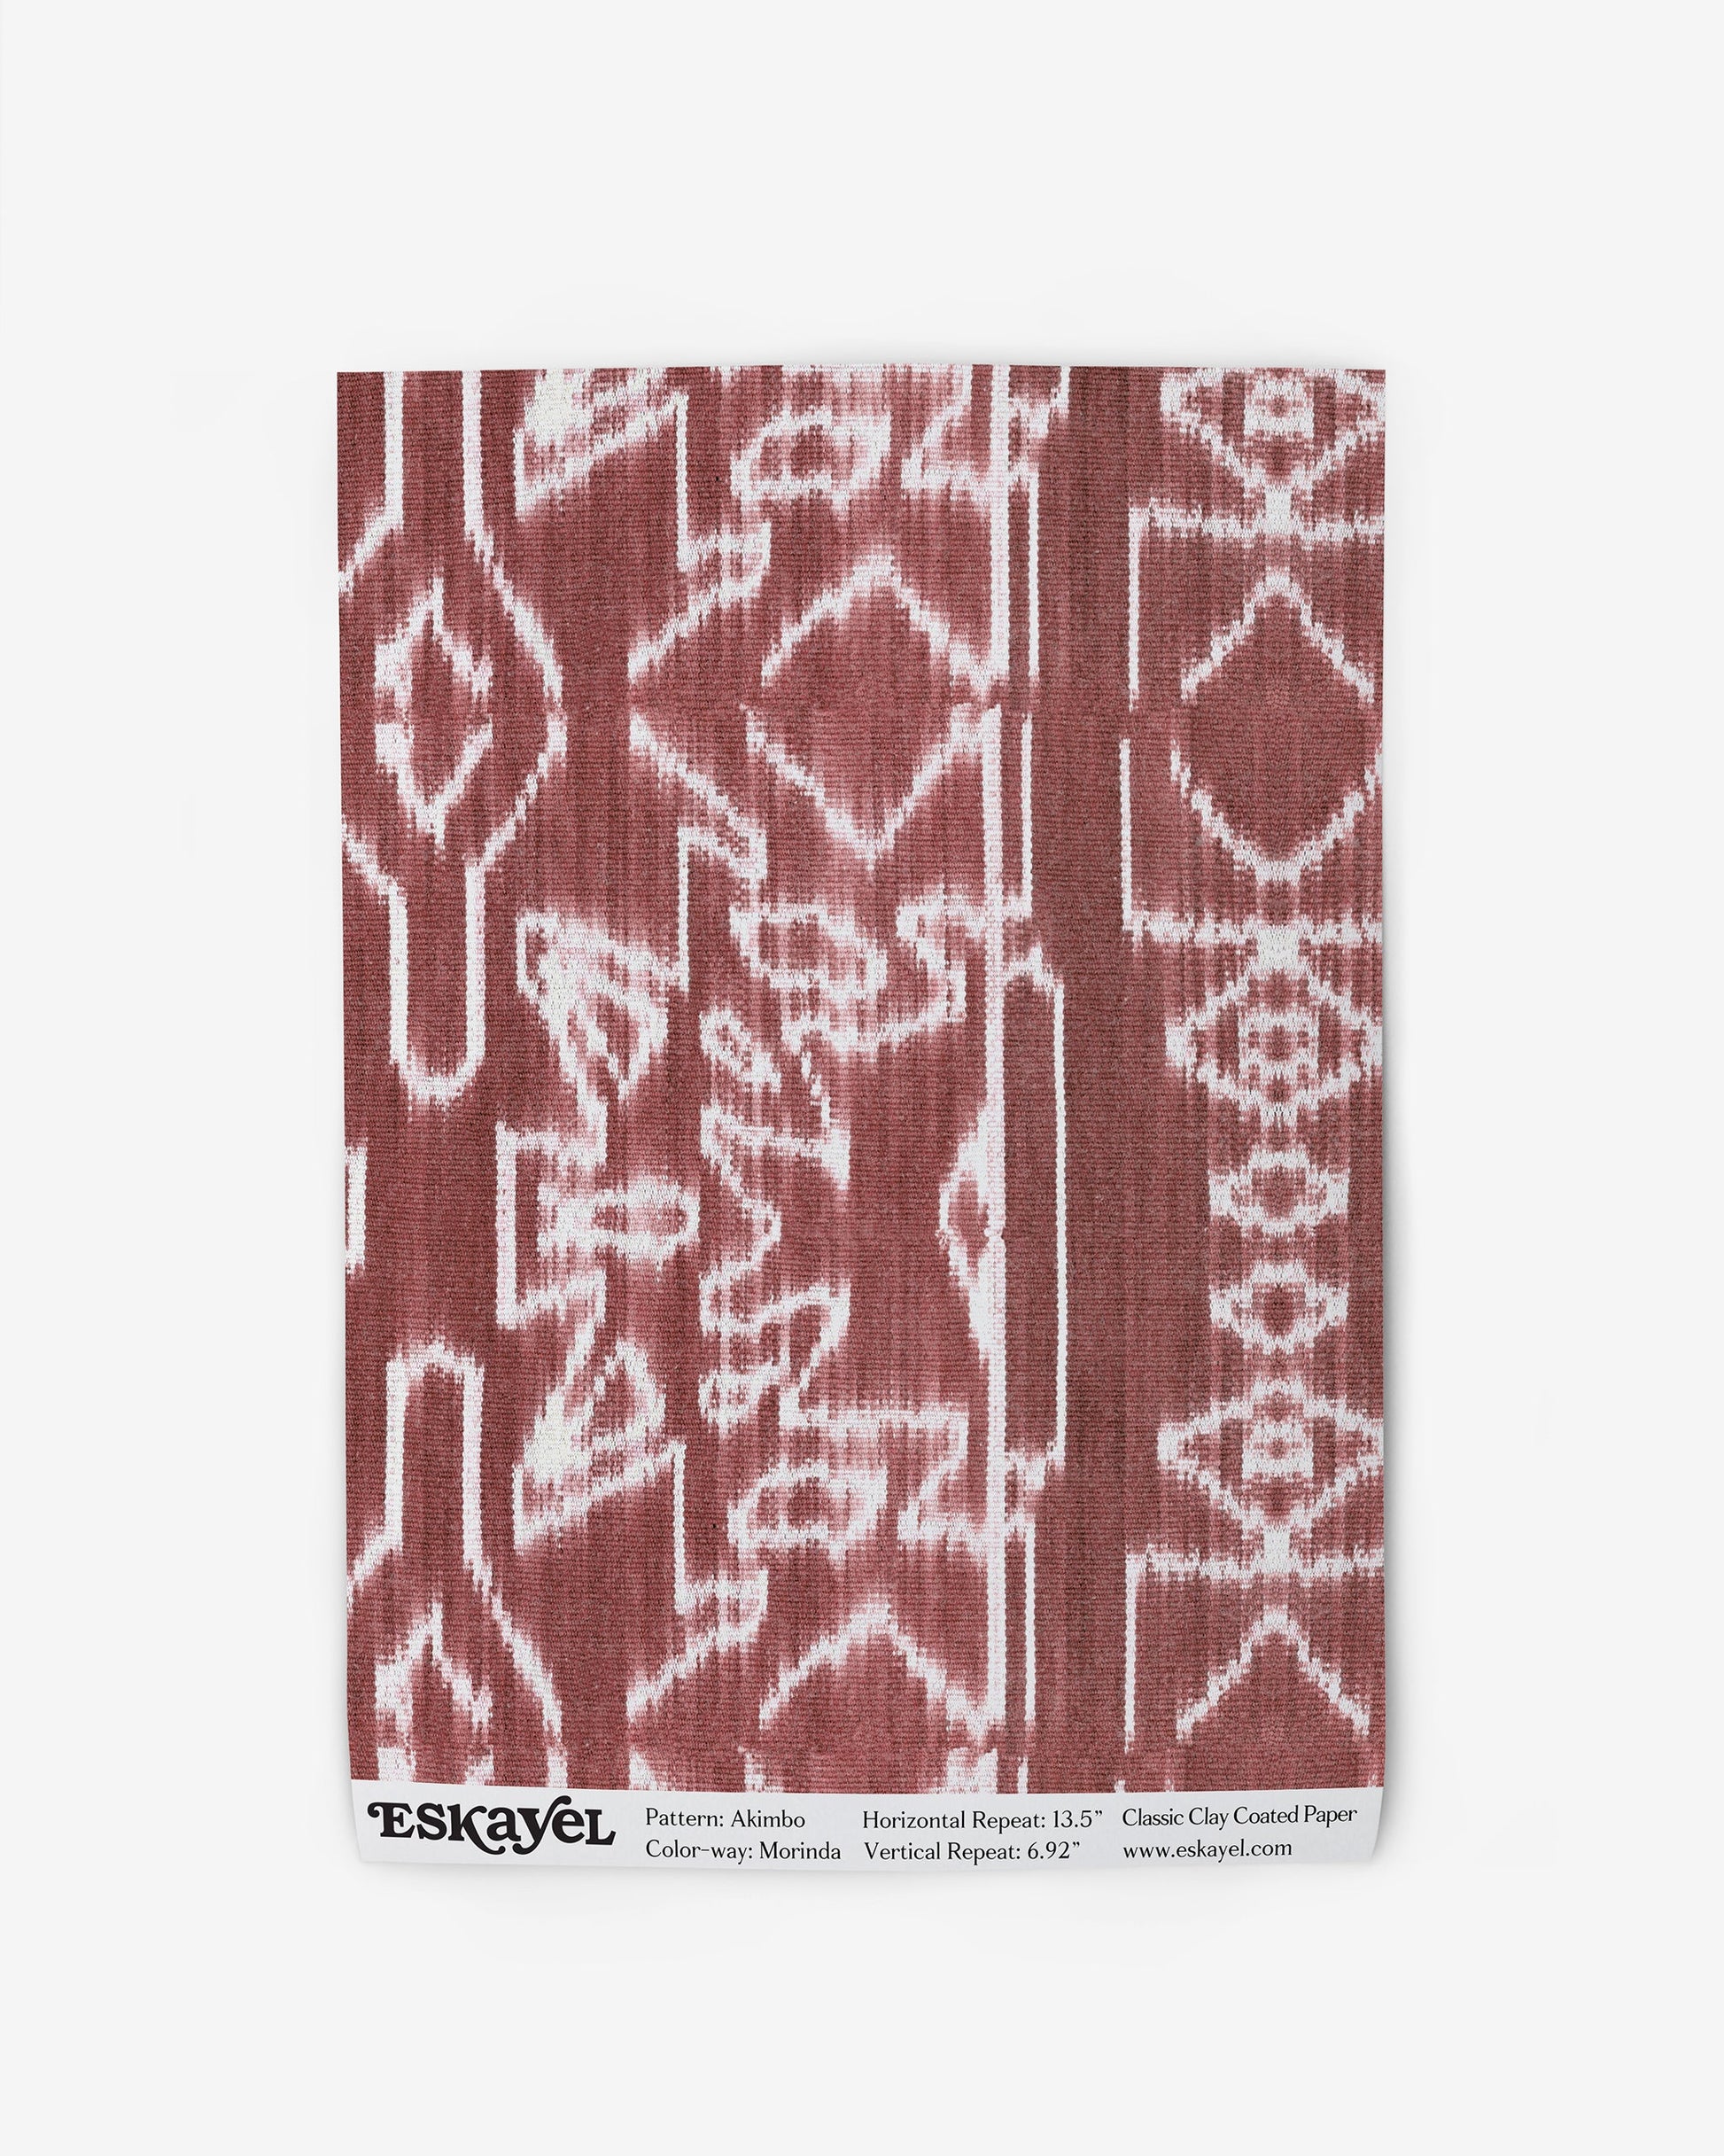 A red and white Akimbo Wallpaper with a Morinda Ikat pattern on a piece of cloth